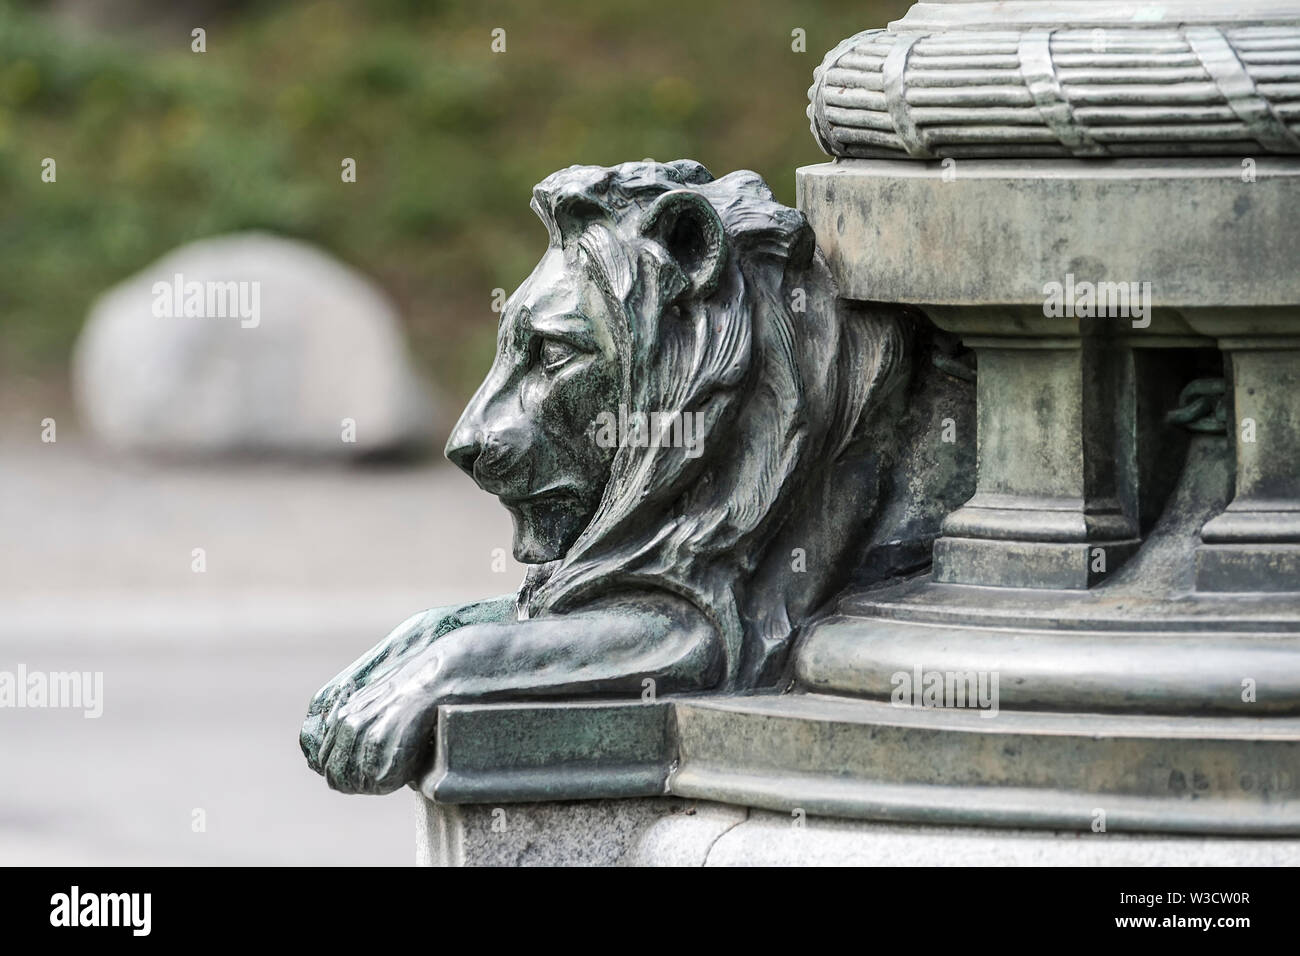 Fragment of a bronze lion sculptures at the base of the monument Stock Photo